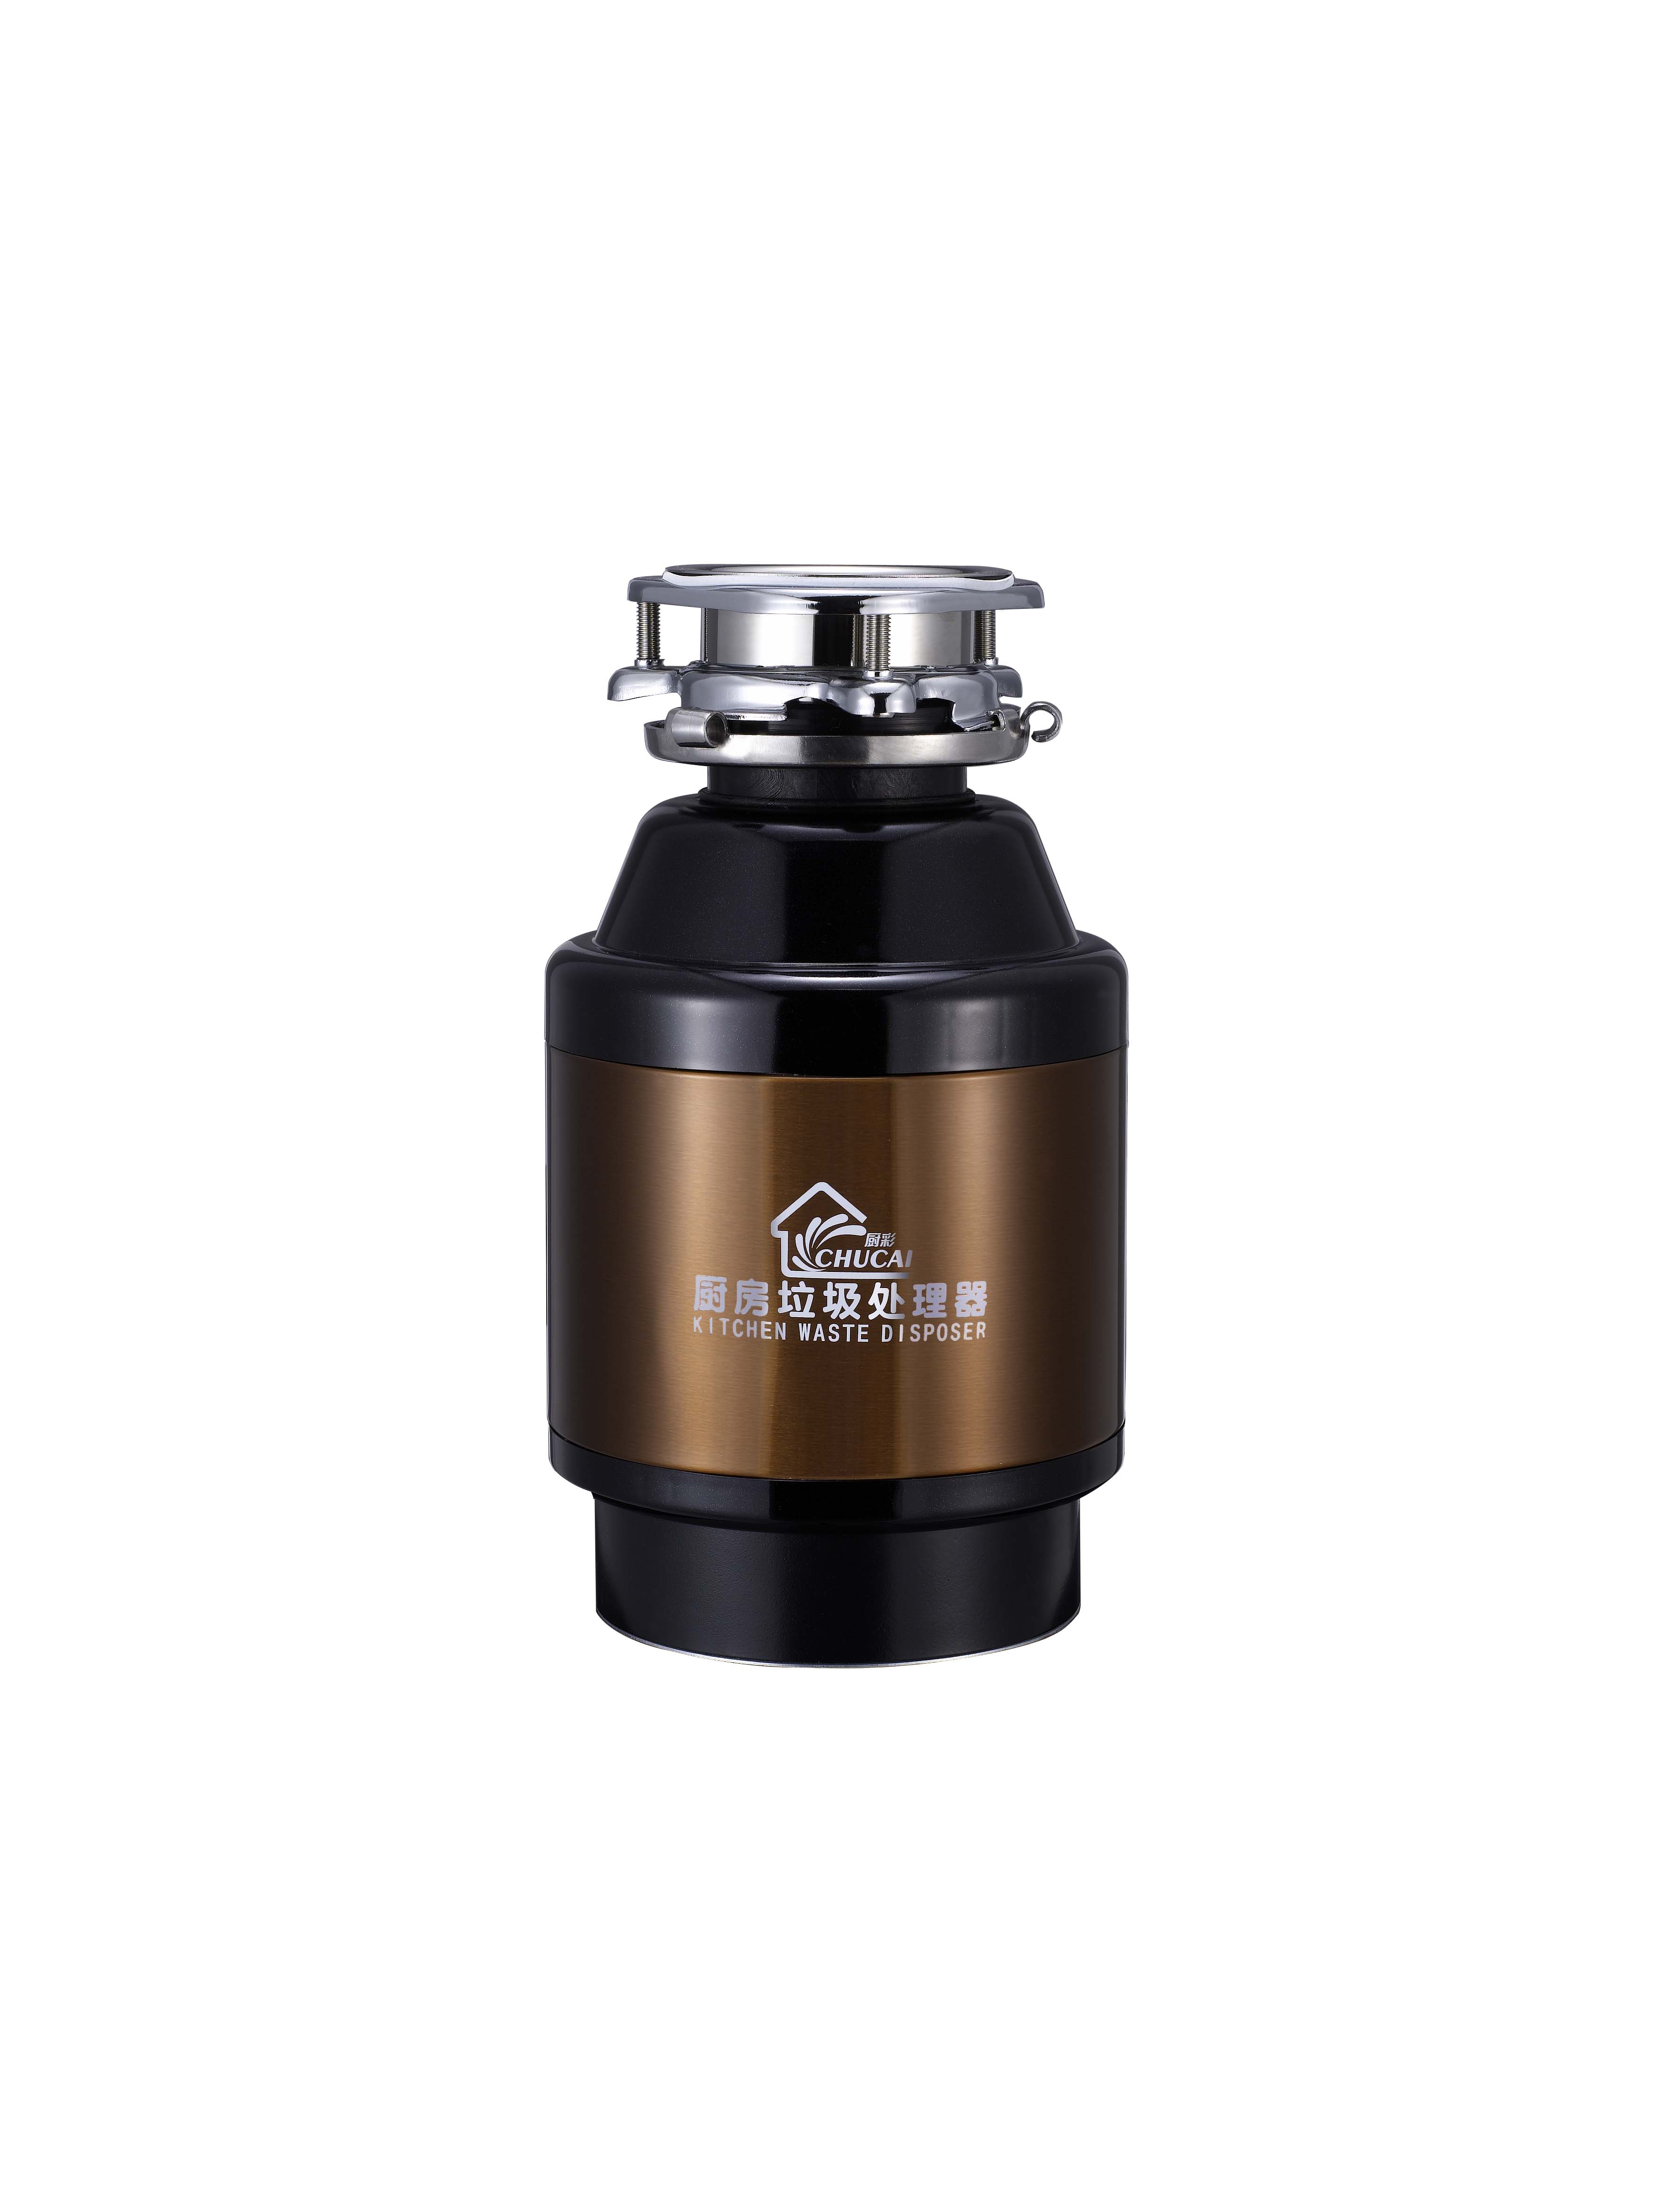 Food waste disposer with easy to install, waterproof and safer